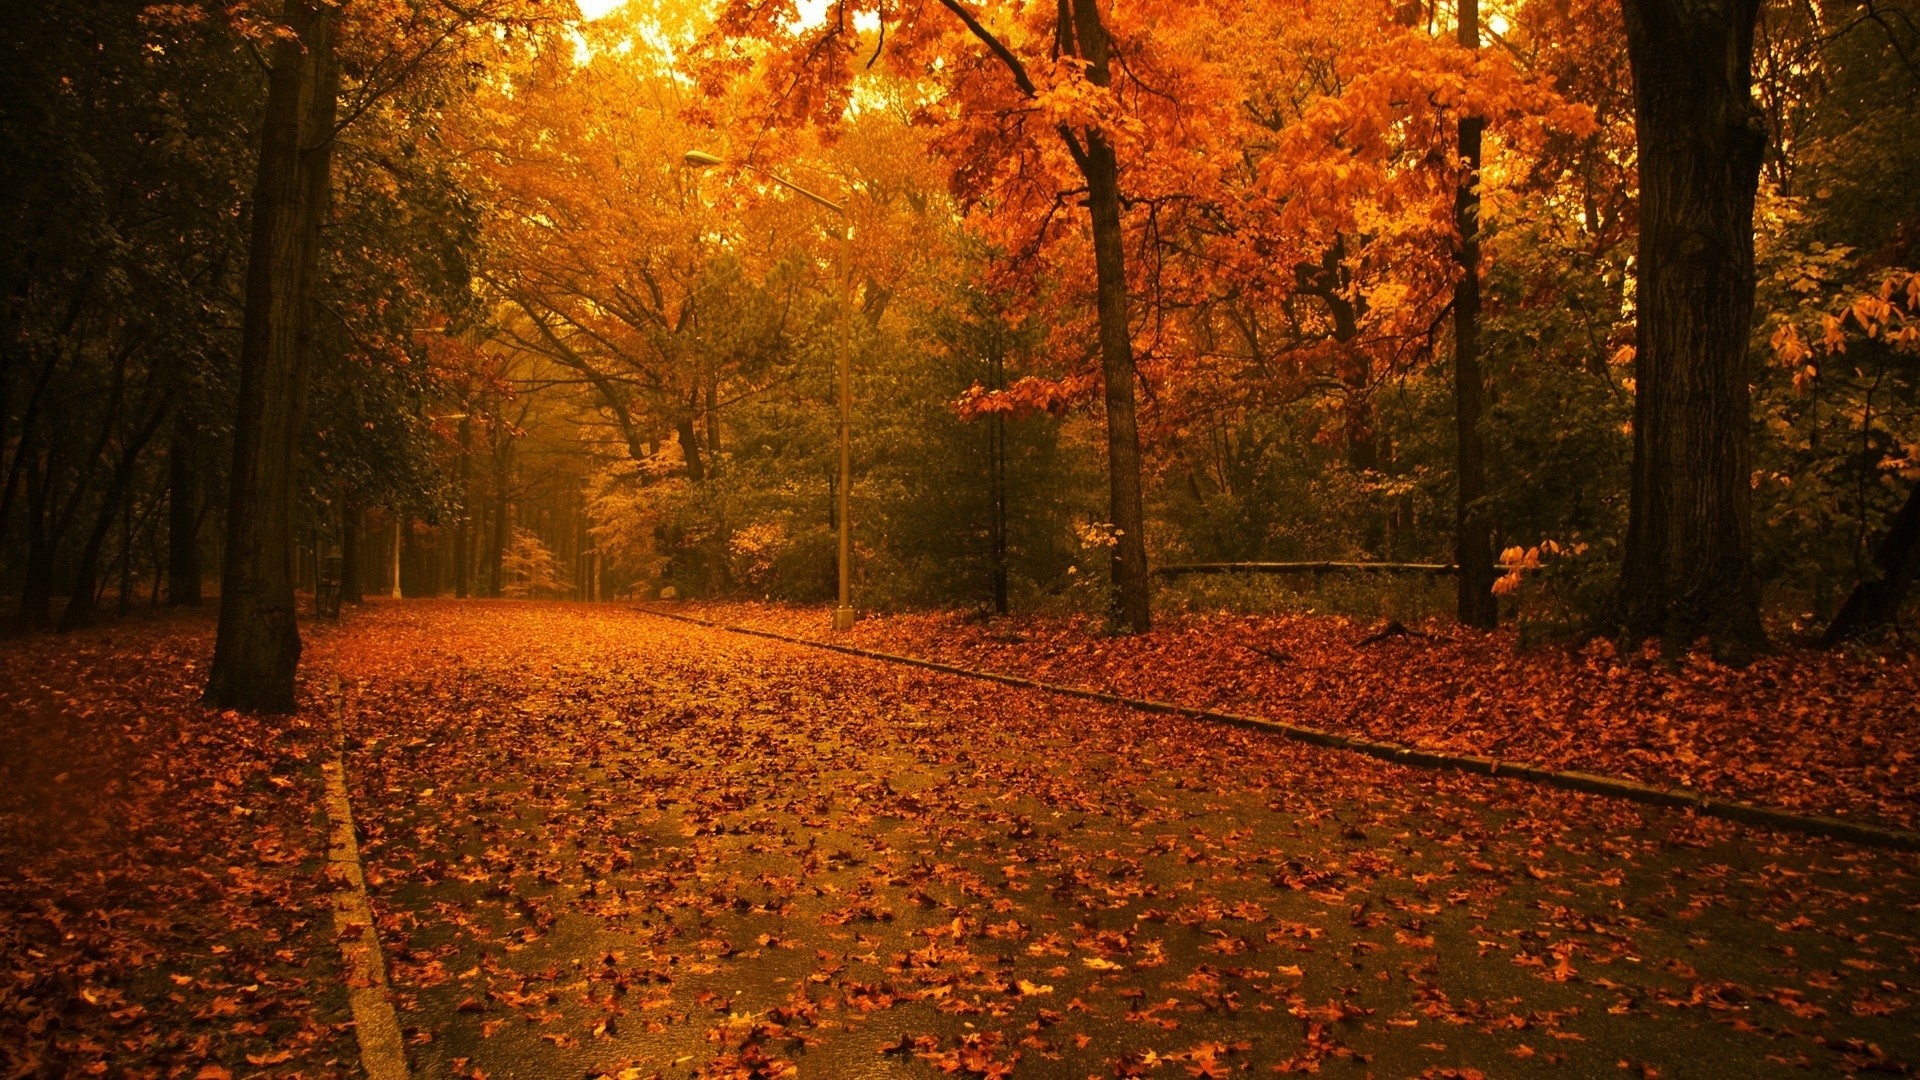 1920x1080 Scenery Pics images Trees in autumn HD wallpaper and background photos